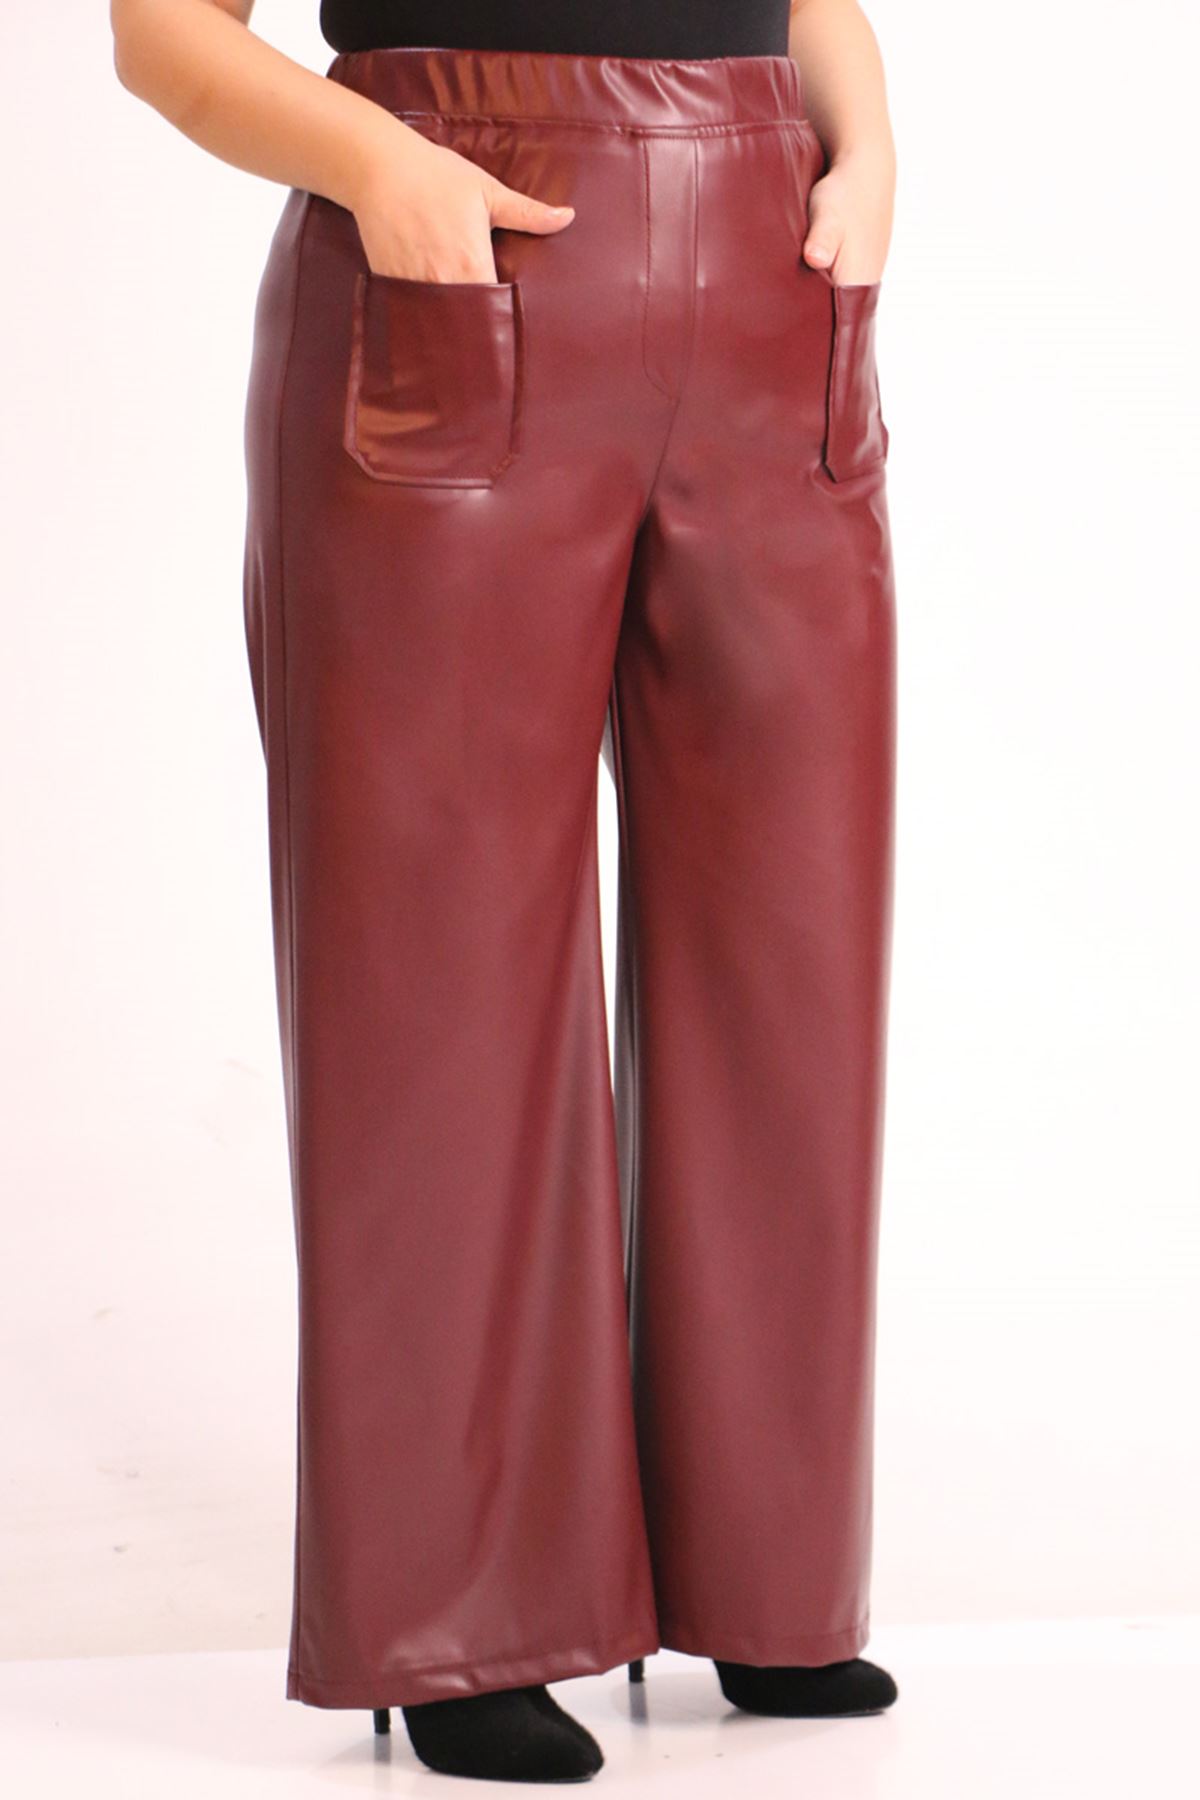 39050 Large Size Wide Leg Leather Trousers-Burgundy